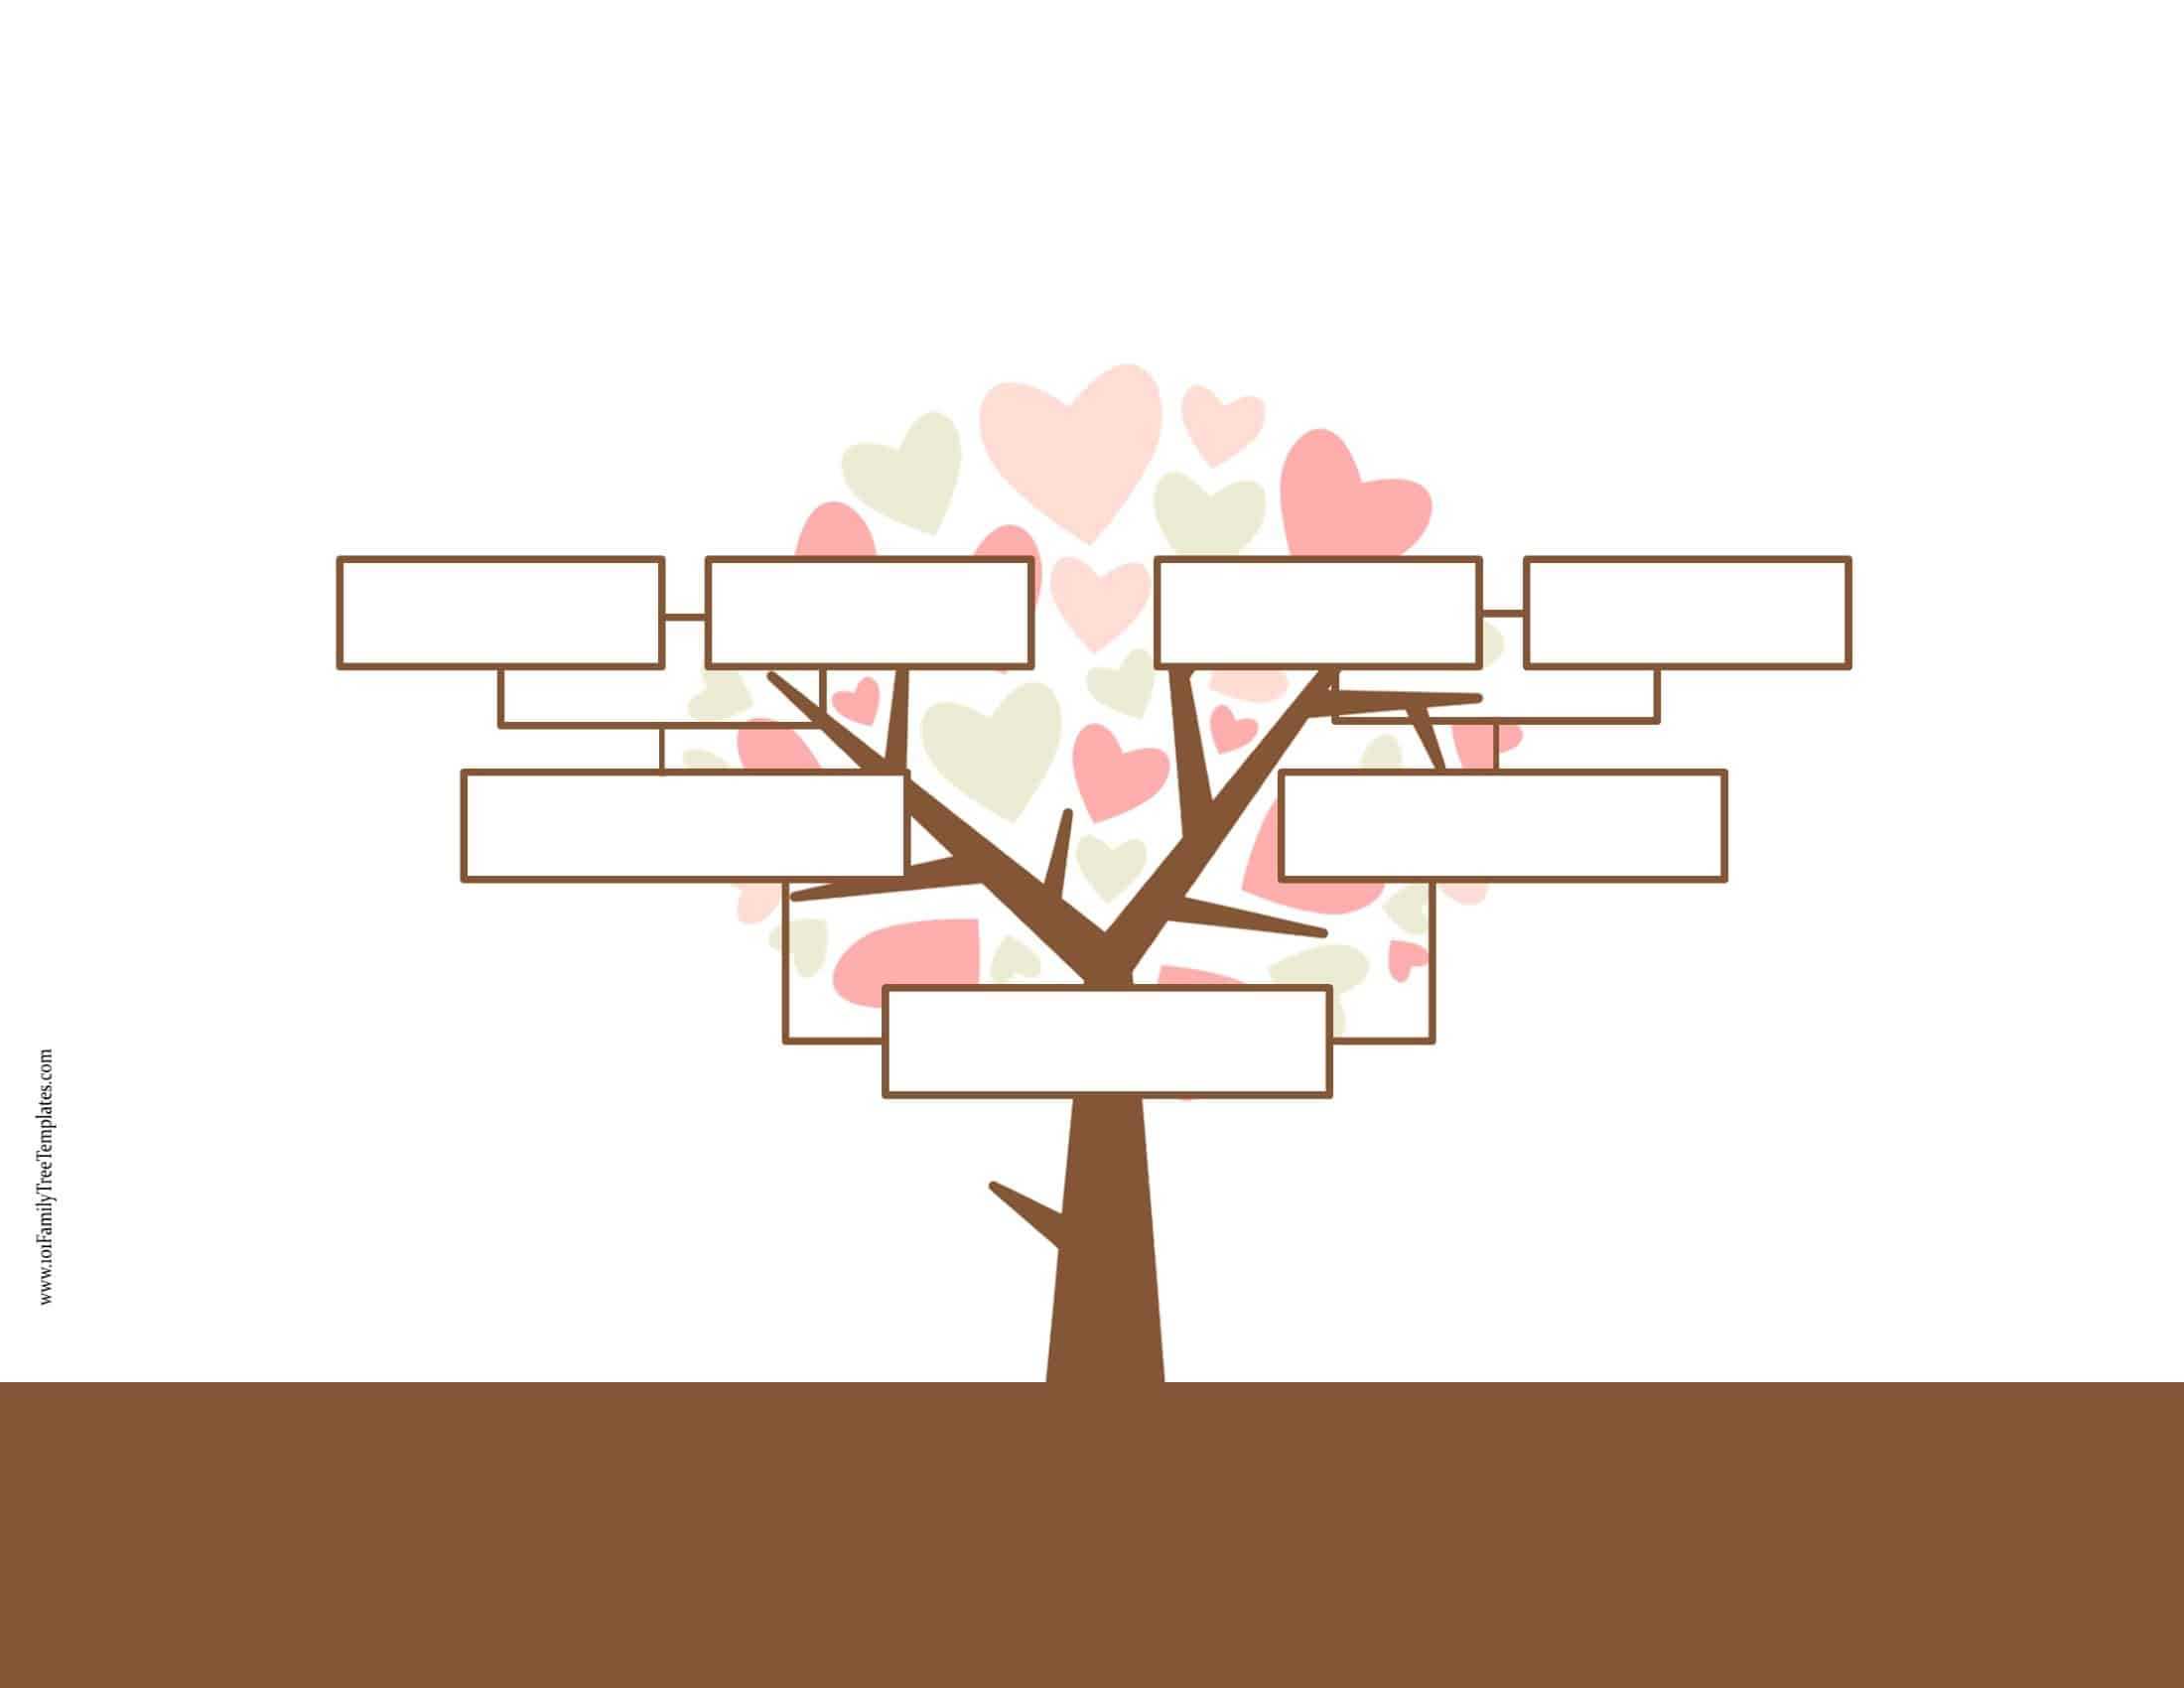 Blank Family Tree Template | Free Instant Download Pertaining To Blank Family Tree Template 3 Generations